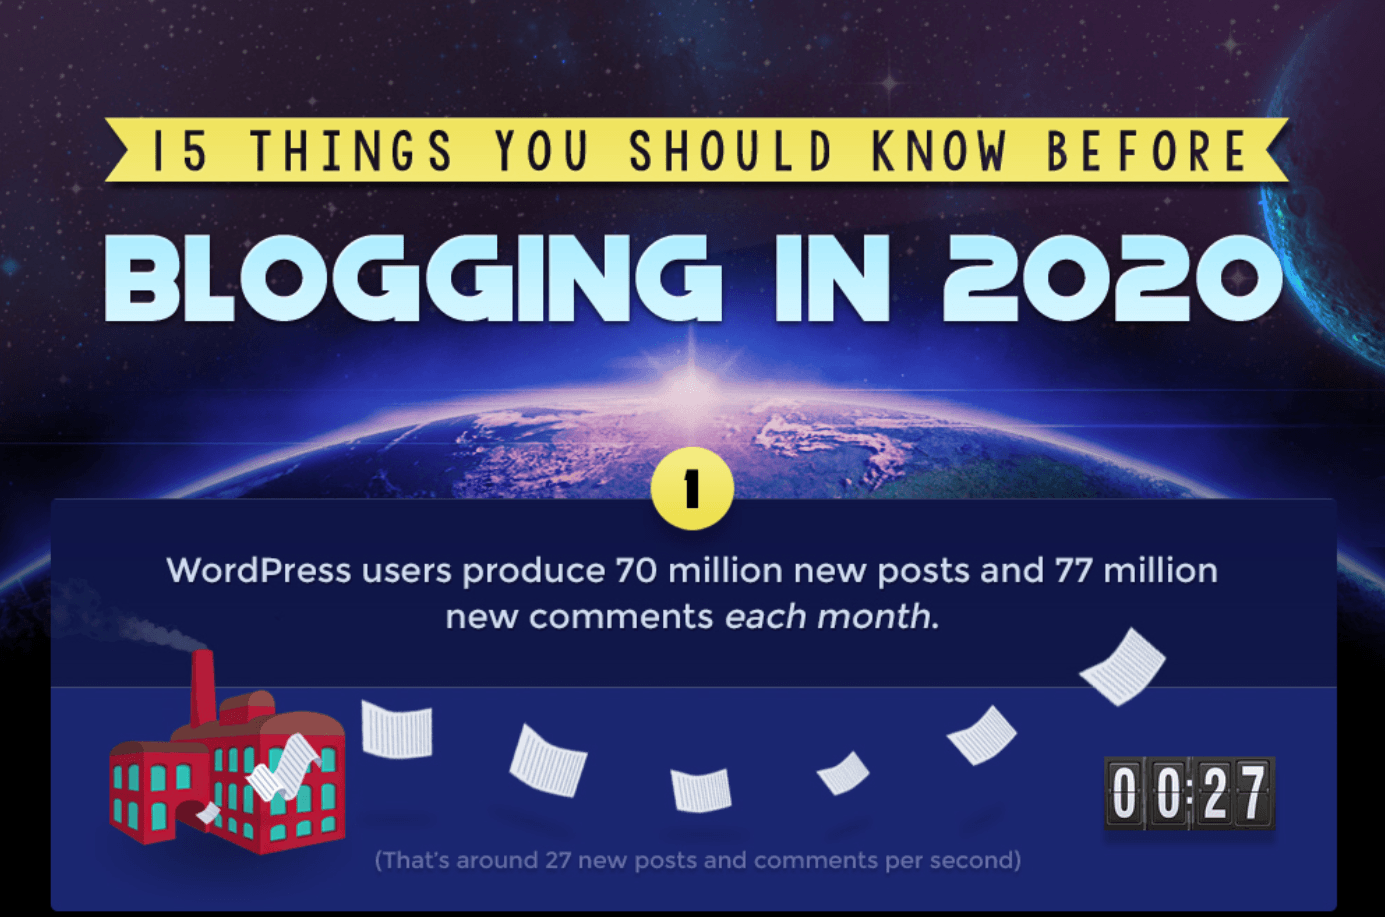 5 Things You Should Know Before Blogging in 2020